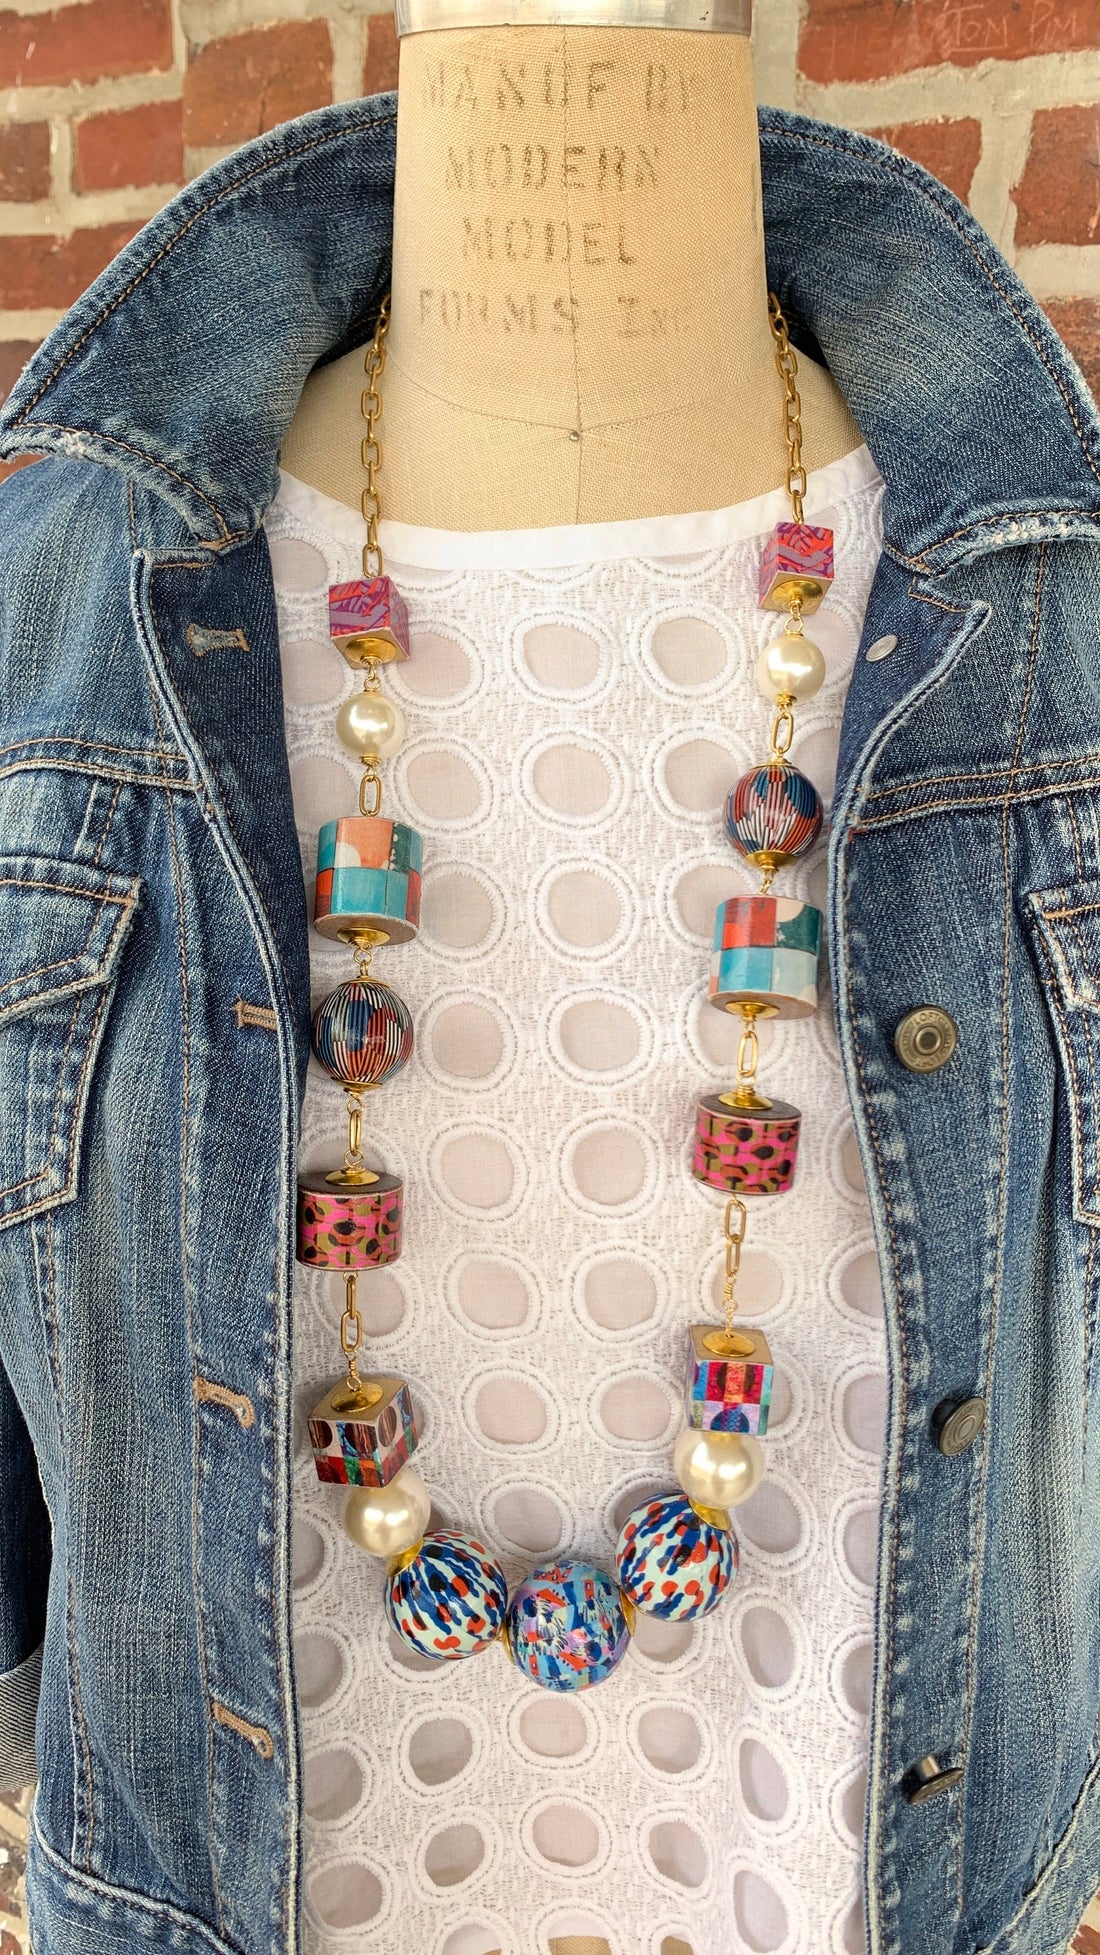 Lenora Dame Decoupage Wooden Bead Statement Necklace